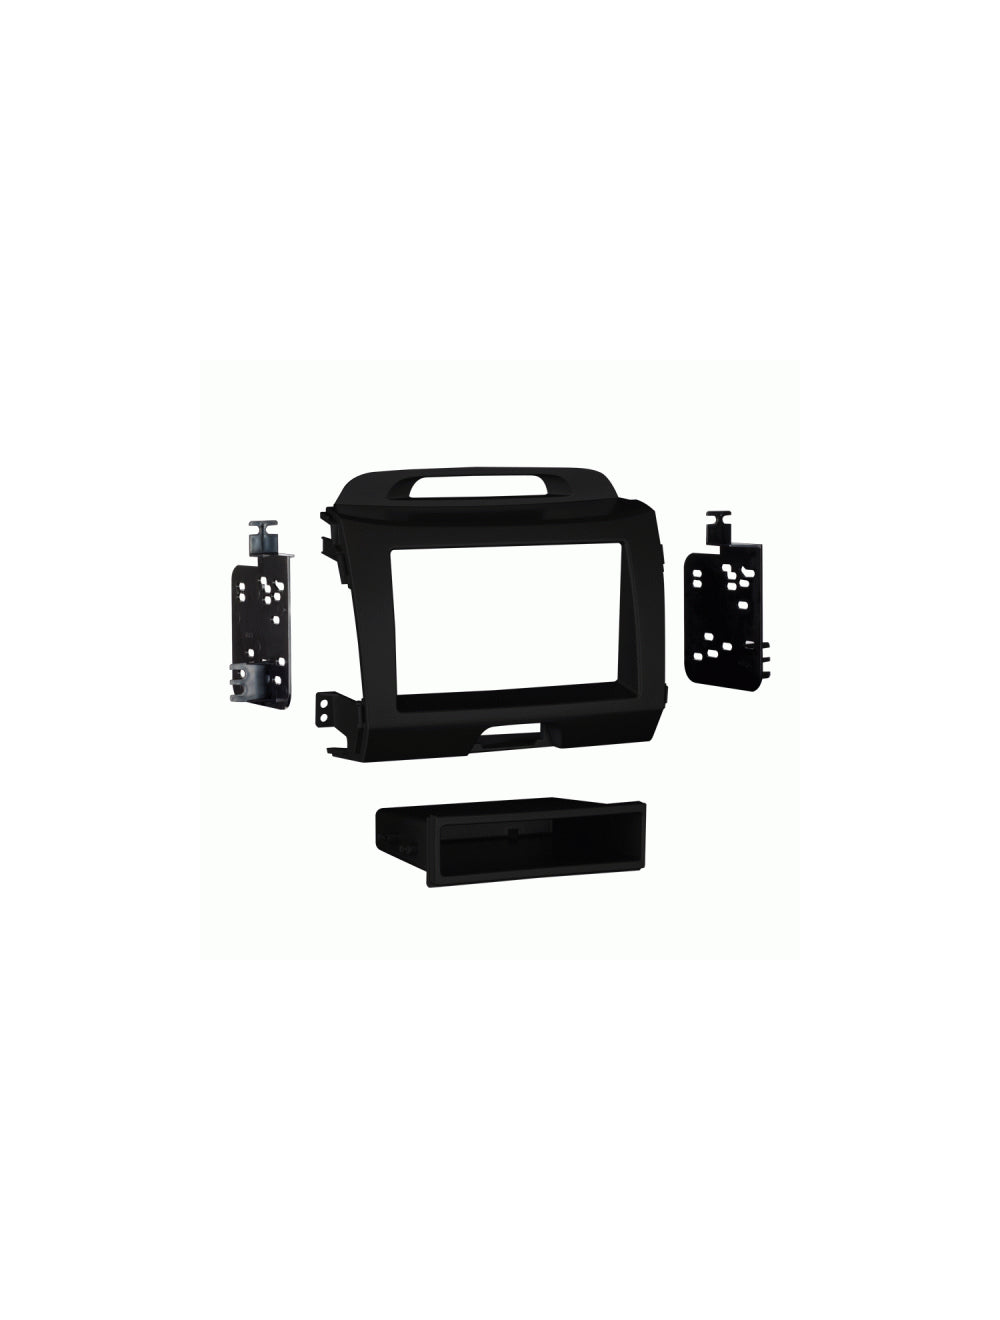 Metra 99-7344CH Double DIN Installation Kit for 2011-2016 Kia Sportage ISO Charcoal